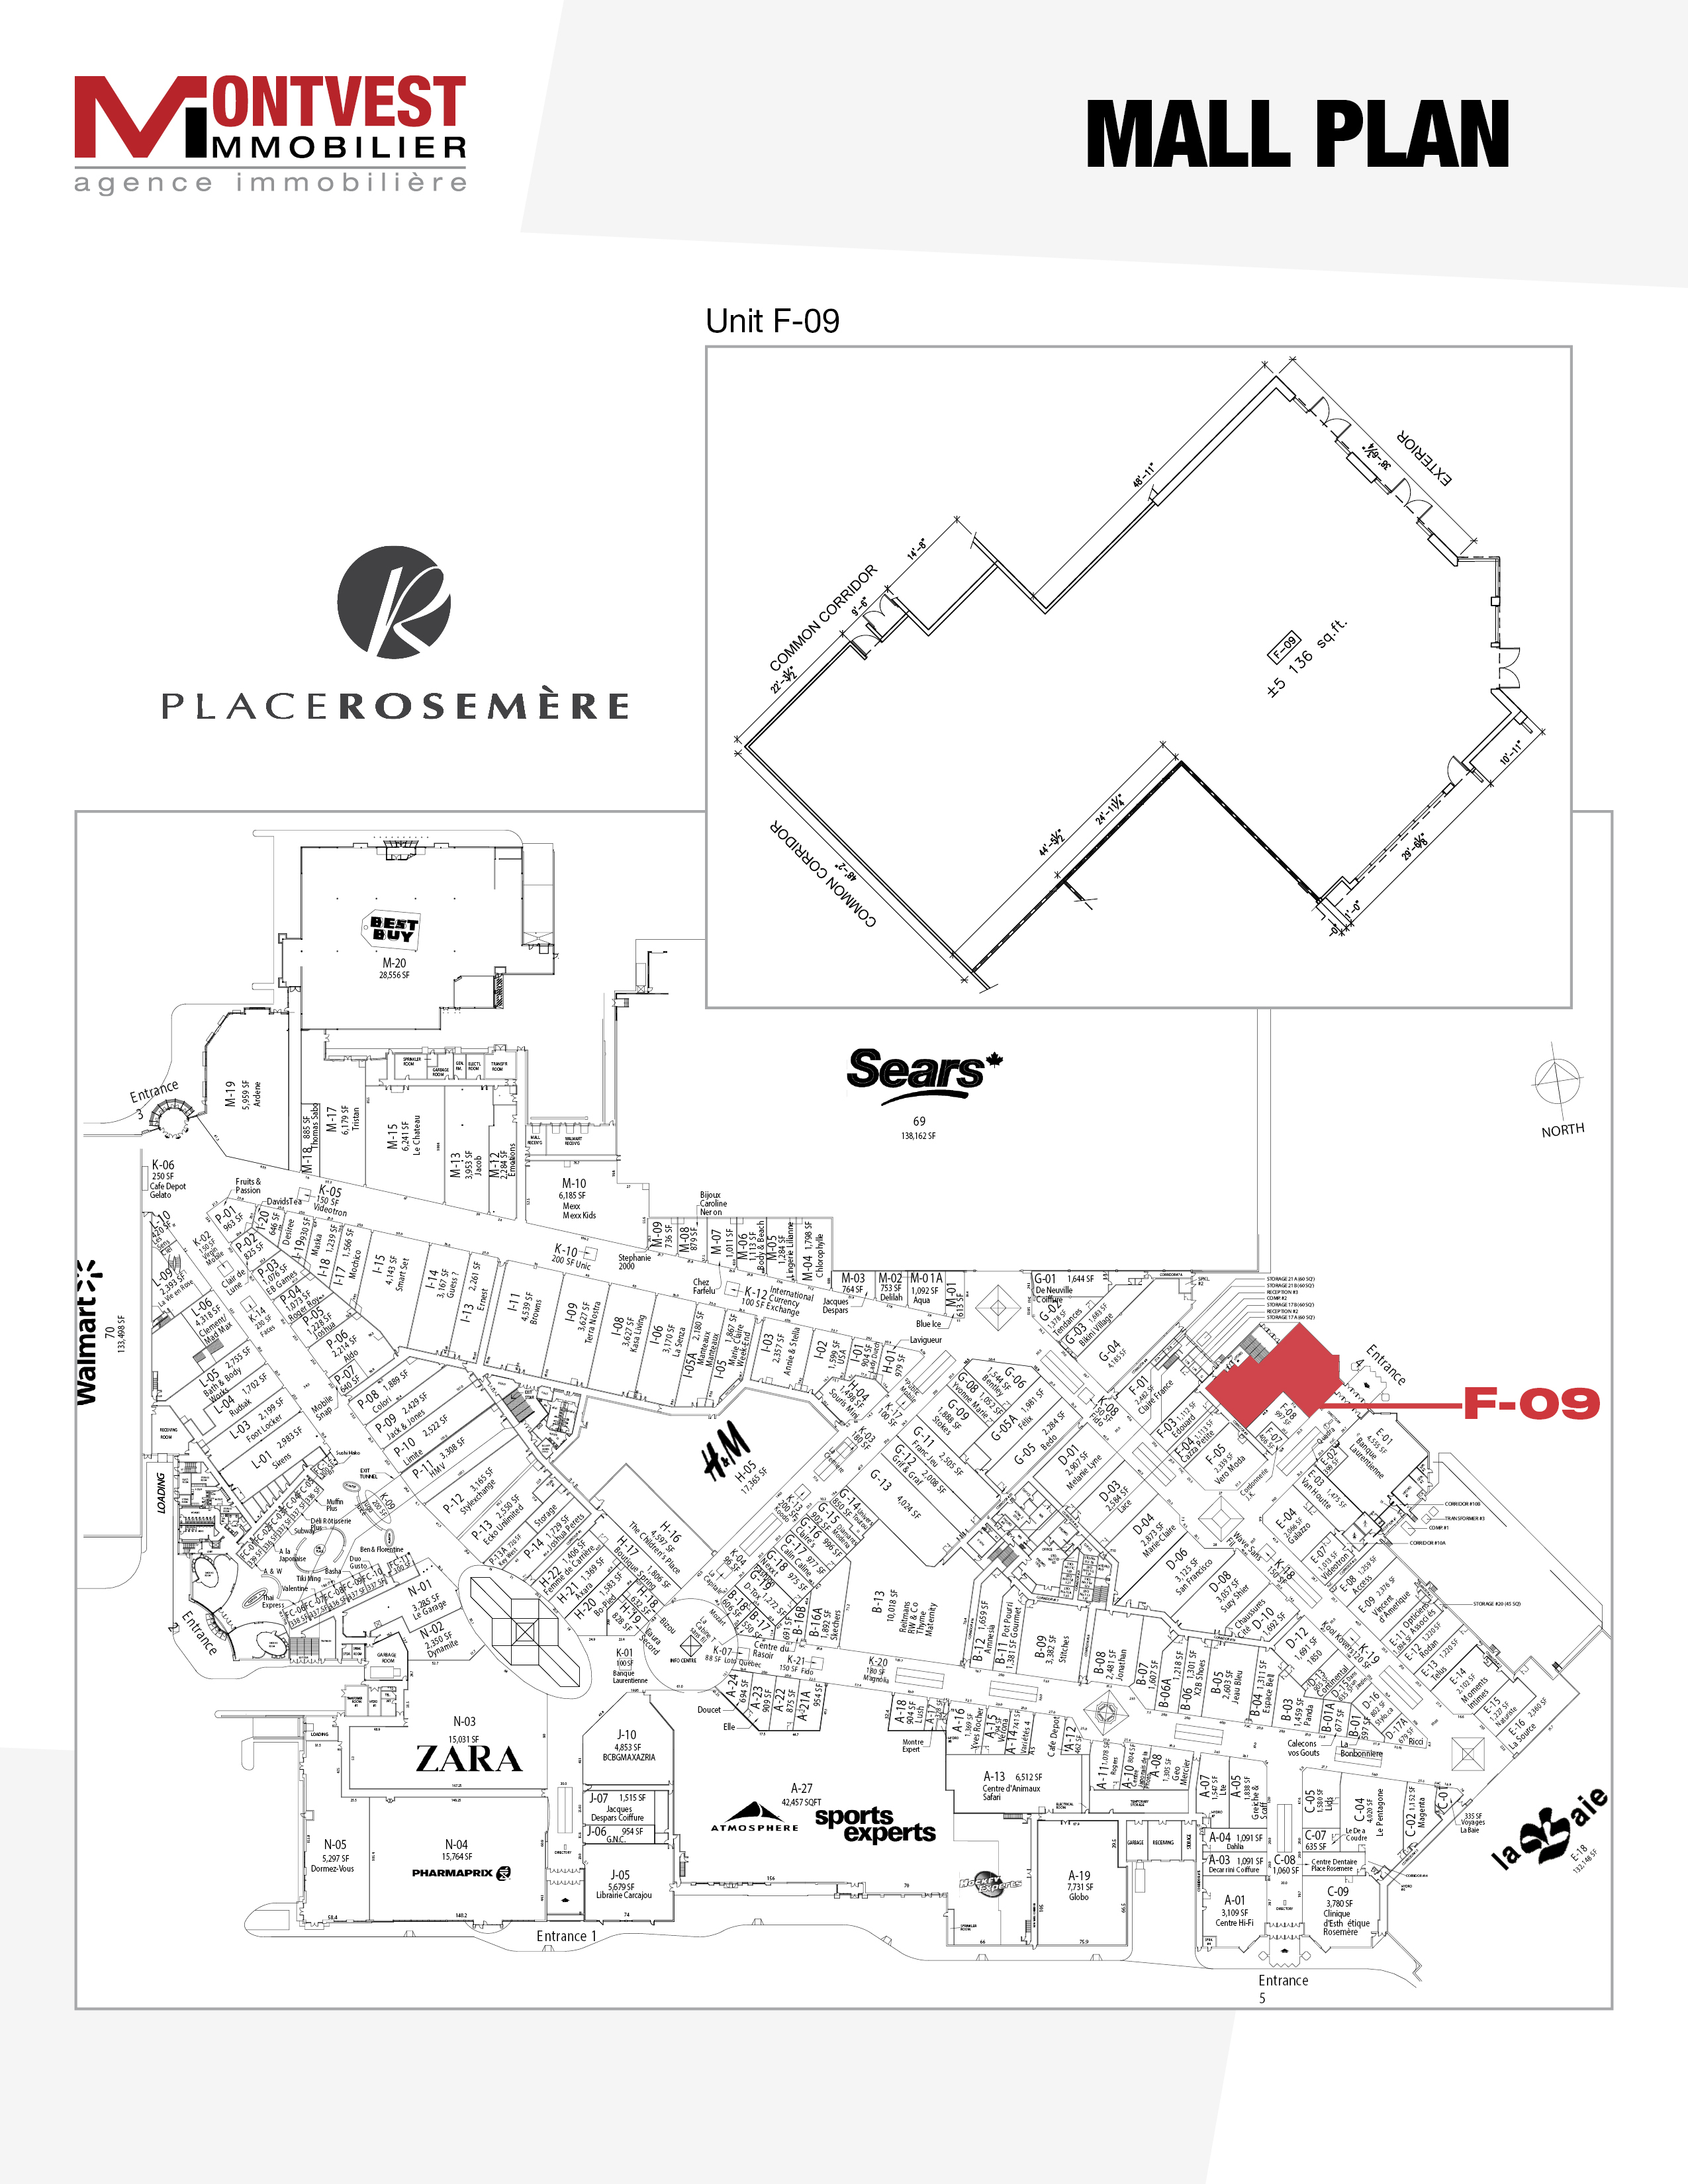 Unit Location in the Mall